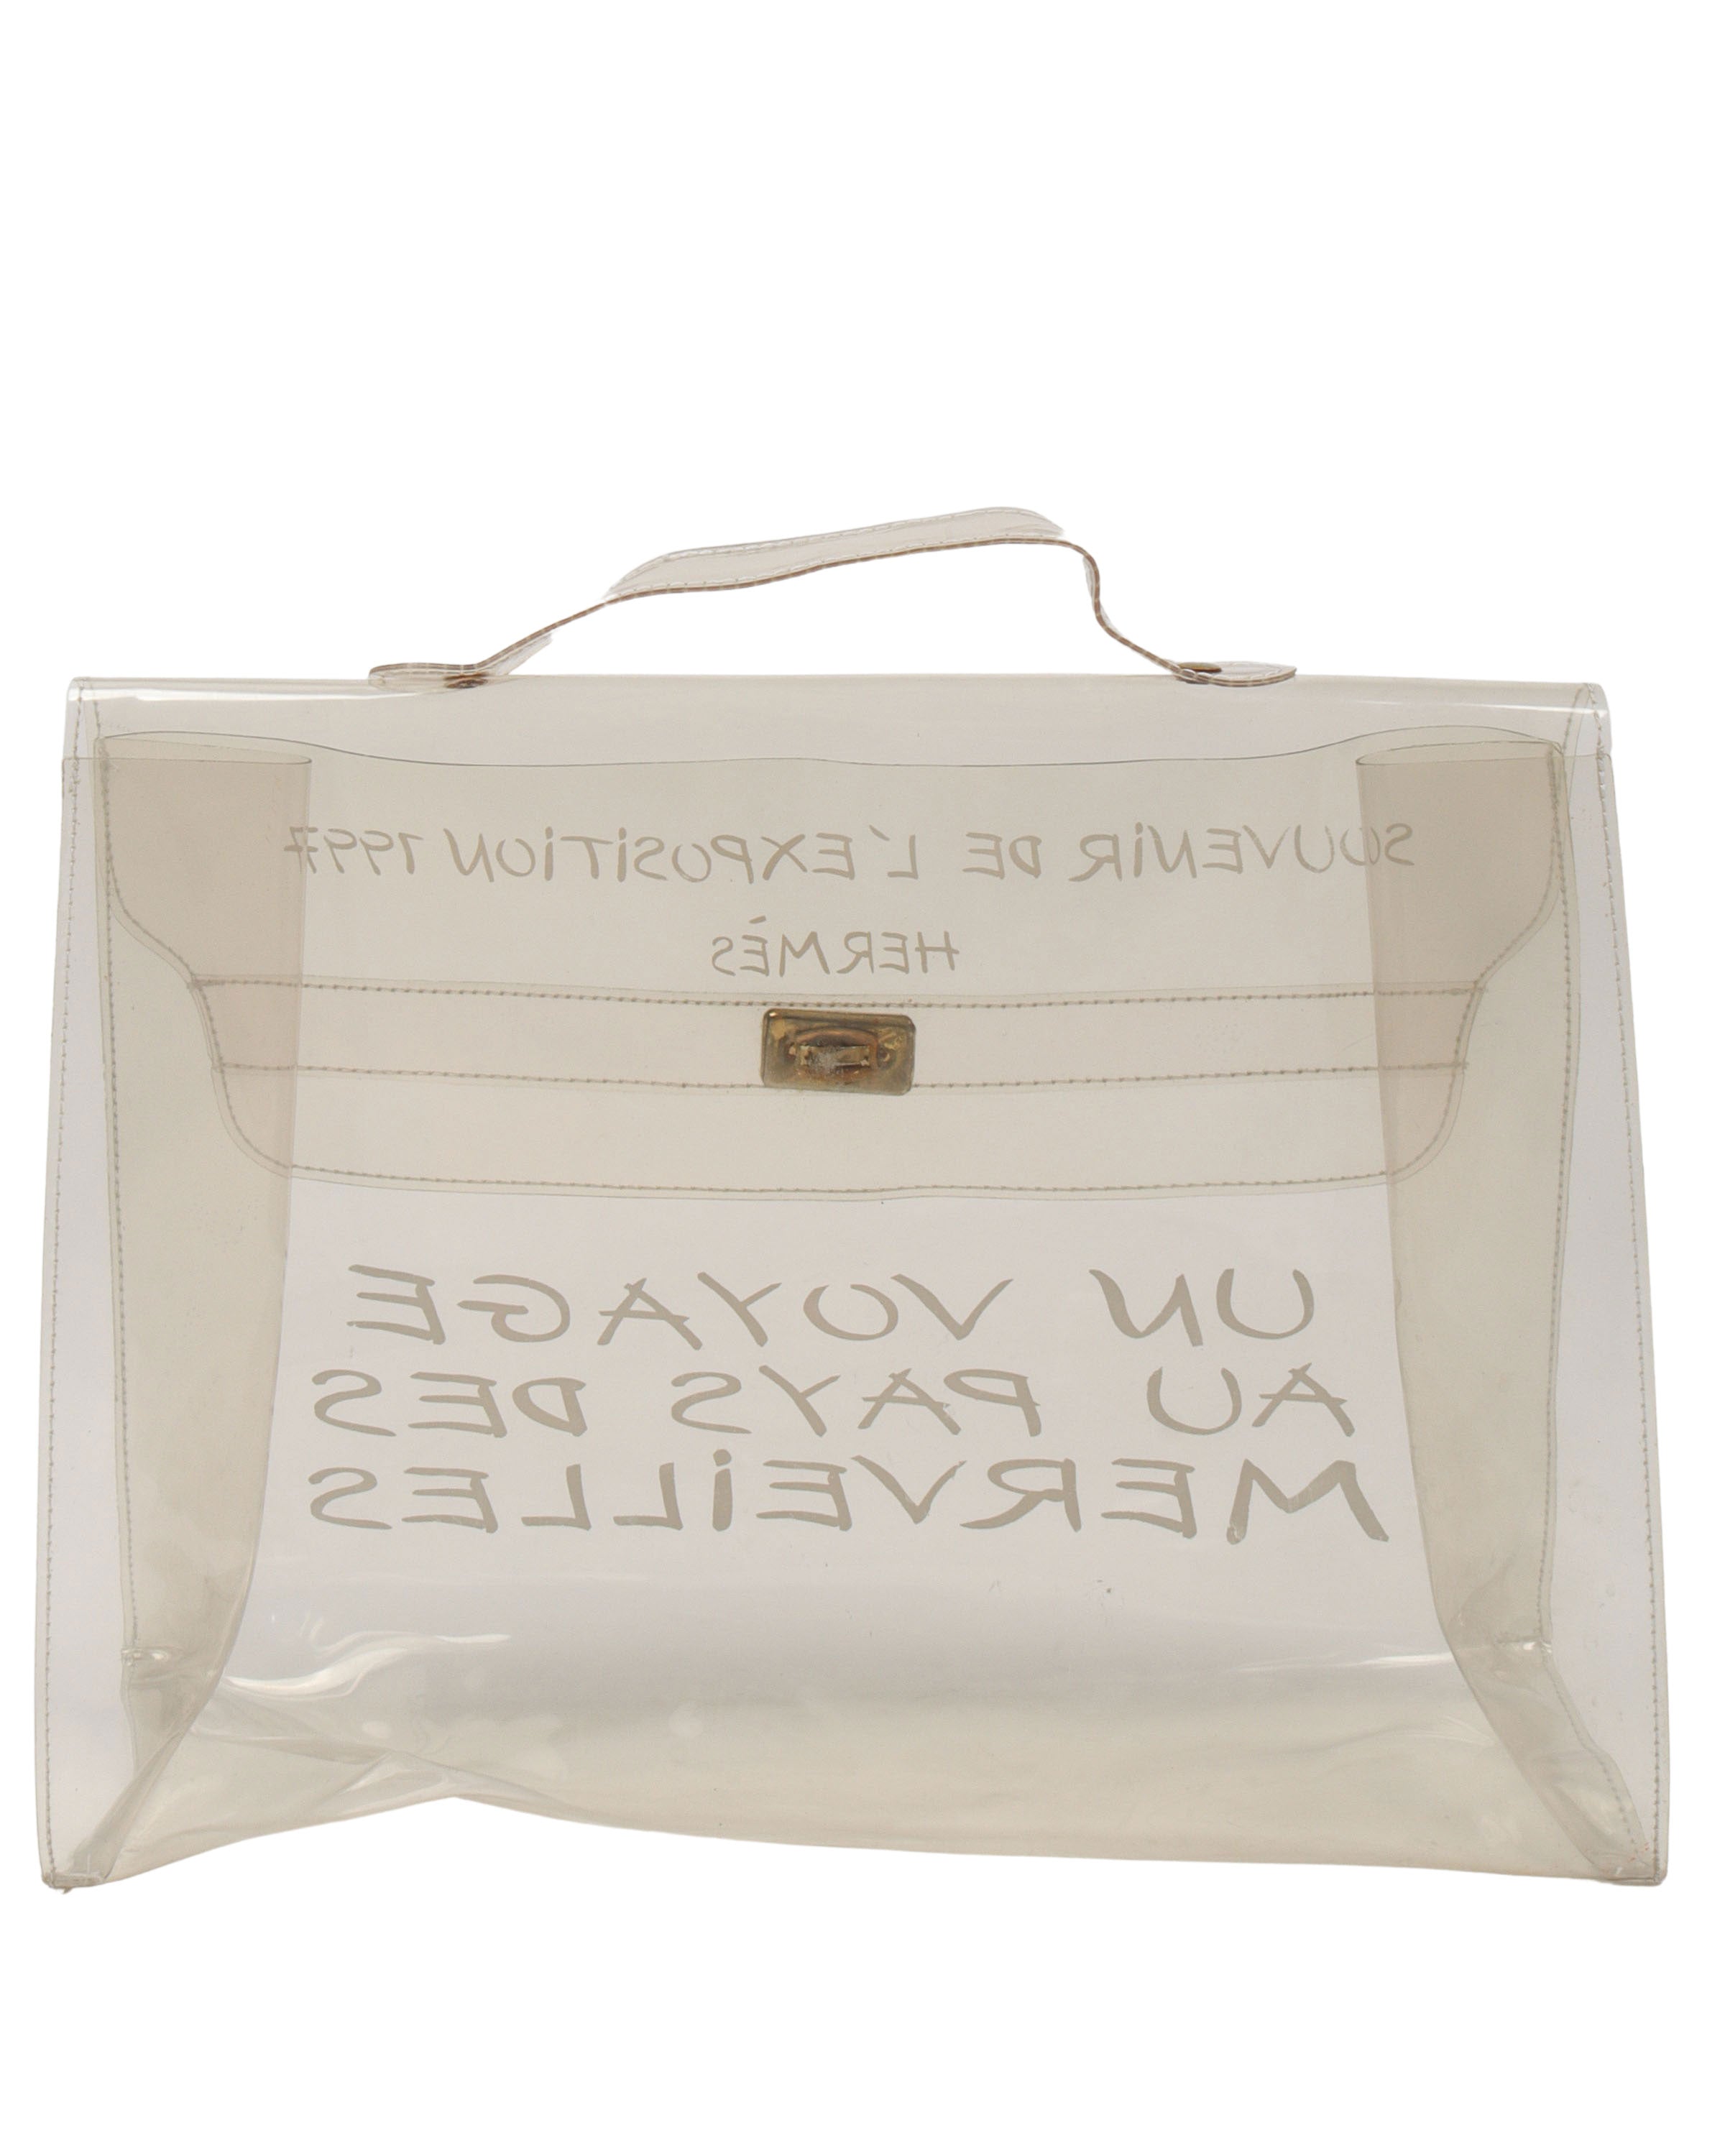 1997 Clear Promotional Kelly Bag